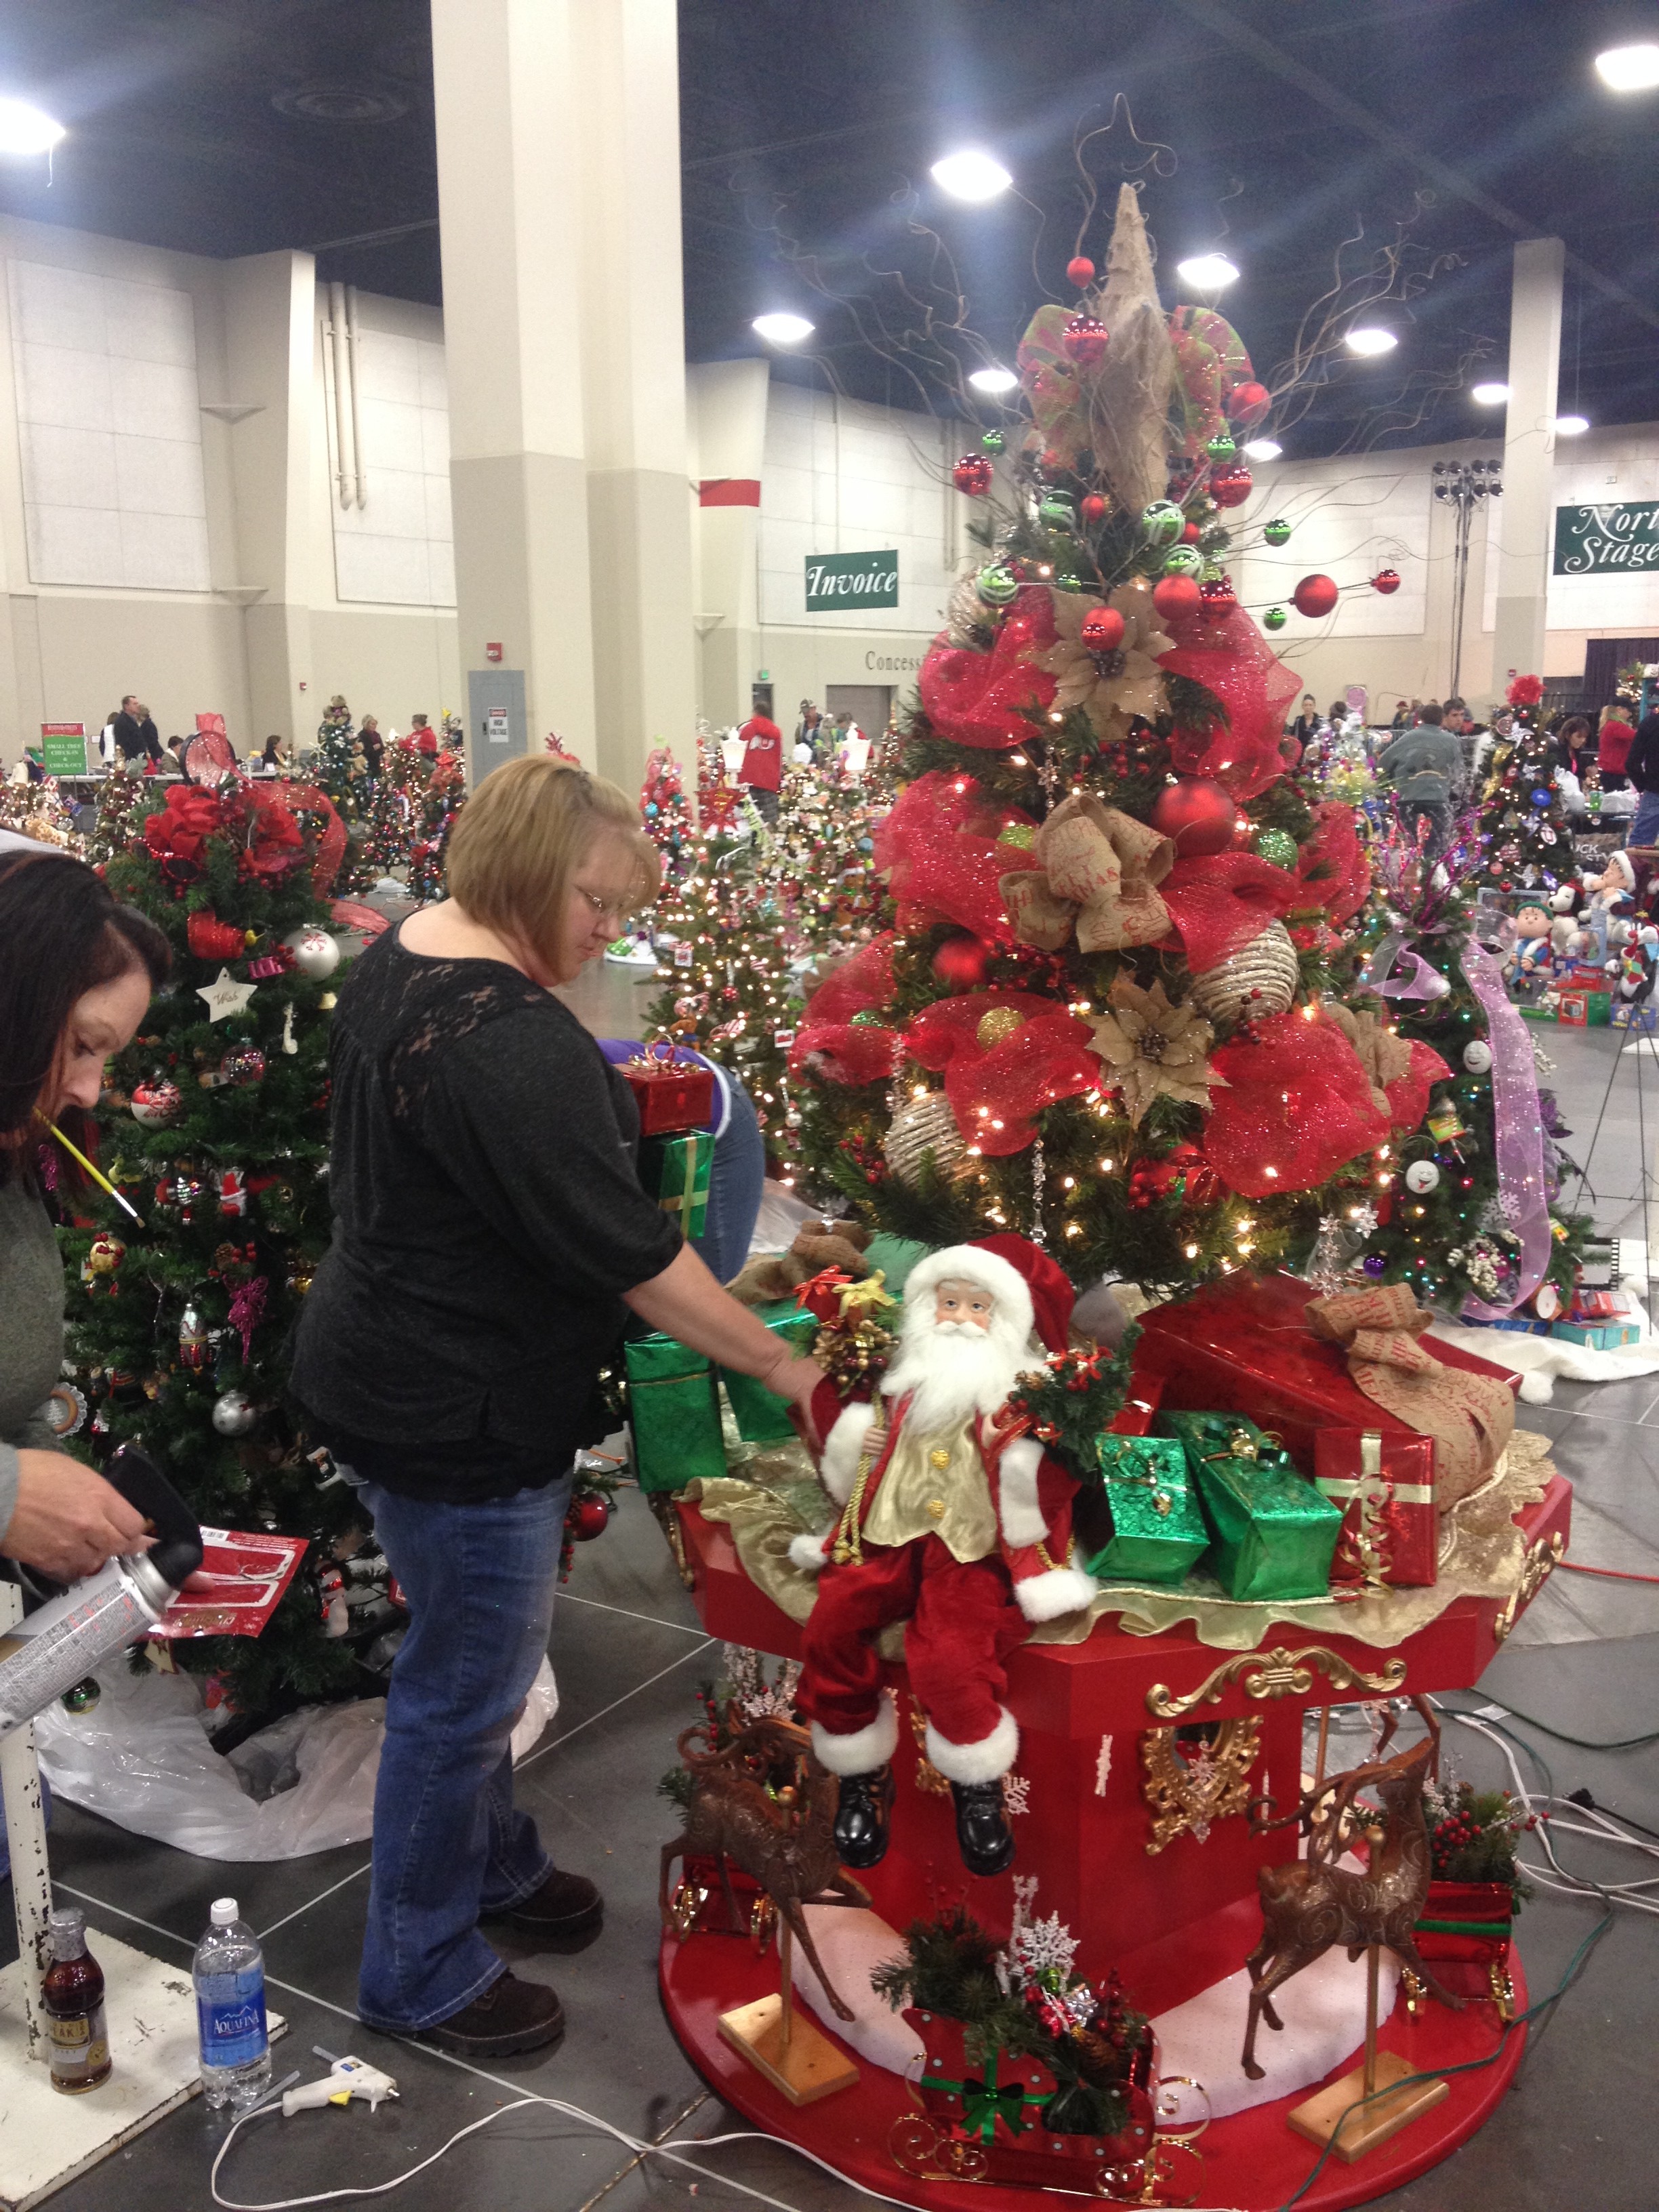 Dugway Des Donation To The 43rd Annual Festival Of Trees Article The United States Army